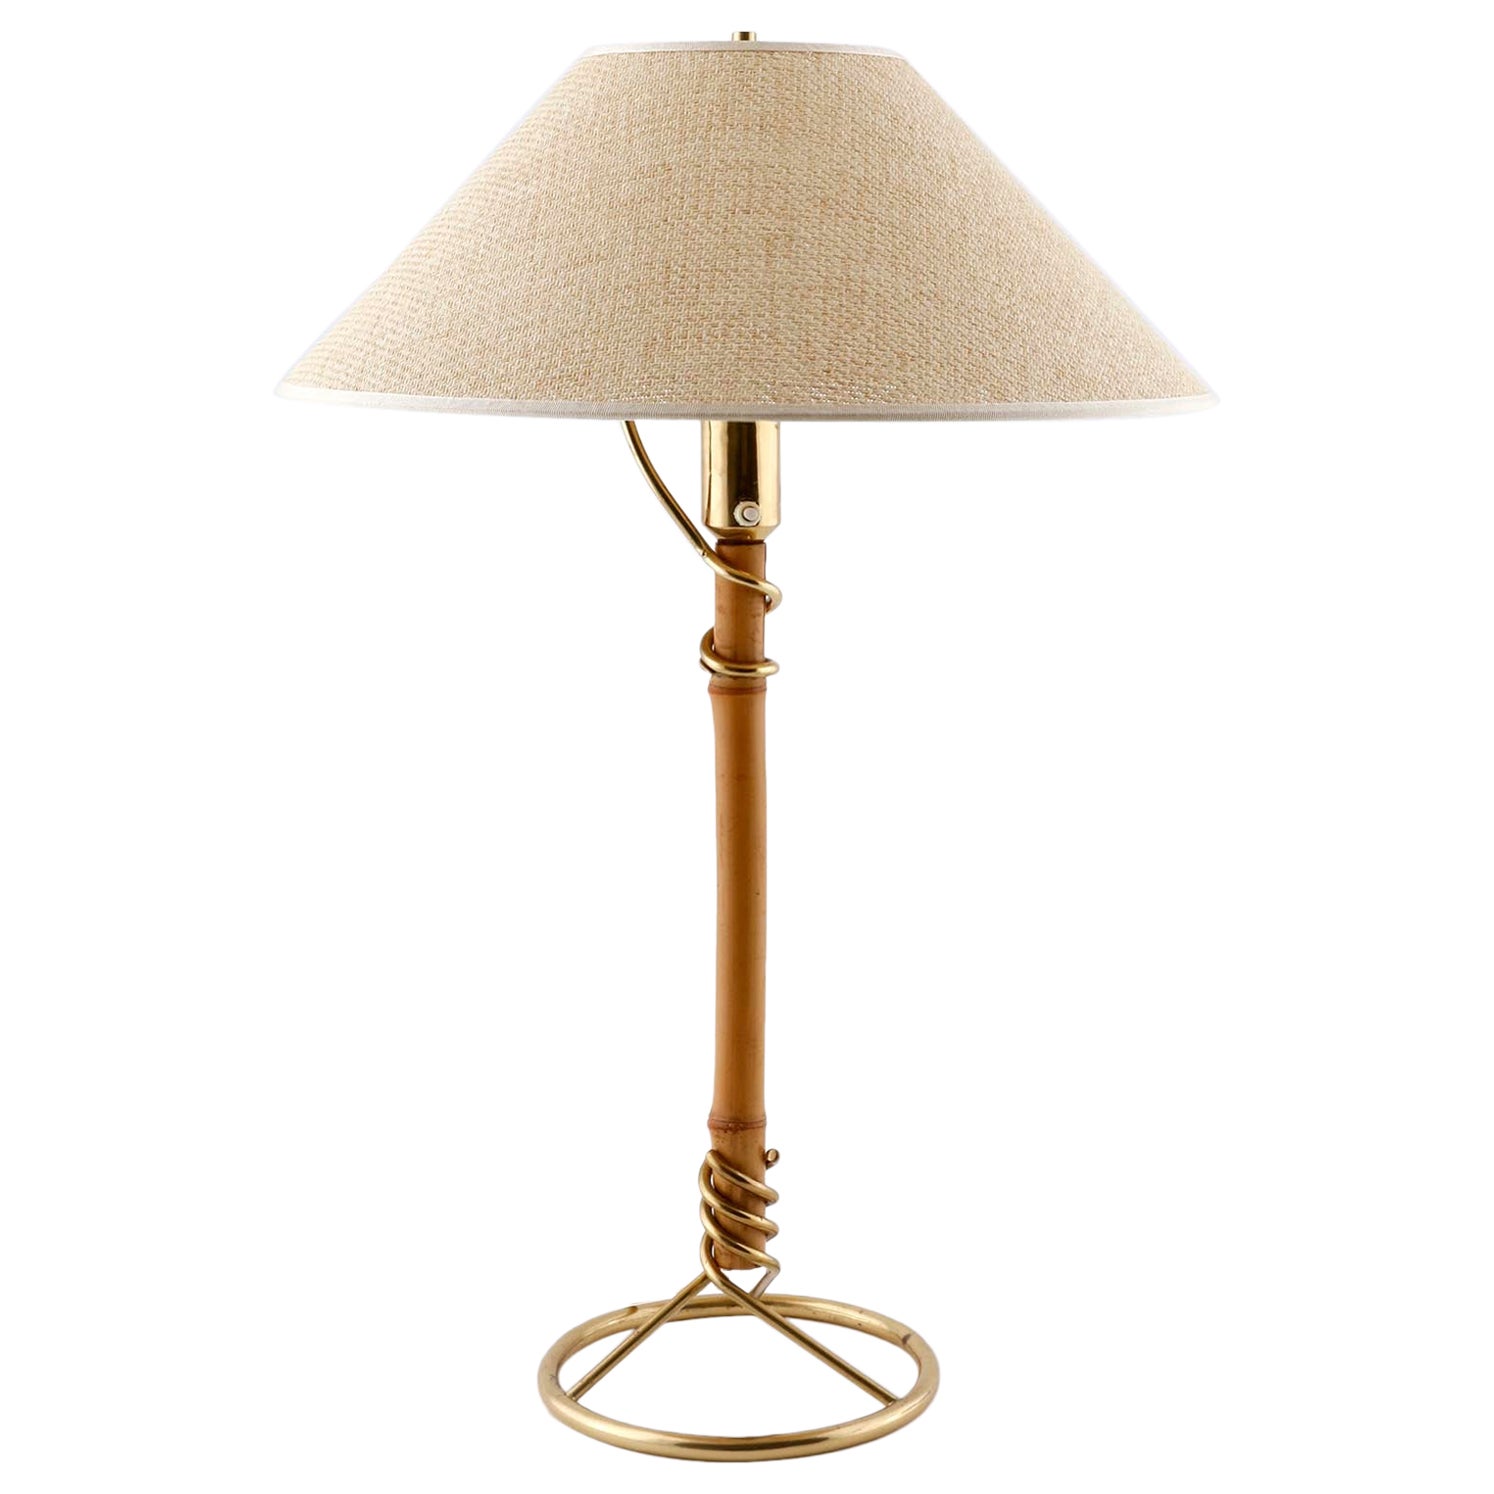 Large Table Lamp, Brass Bamboo Cane Wicker Shade, attr. J.T. Kalmar, 1950s For Sale